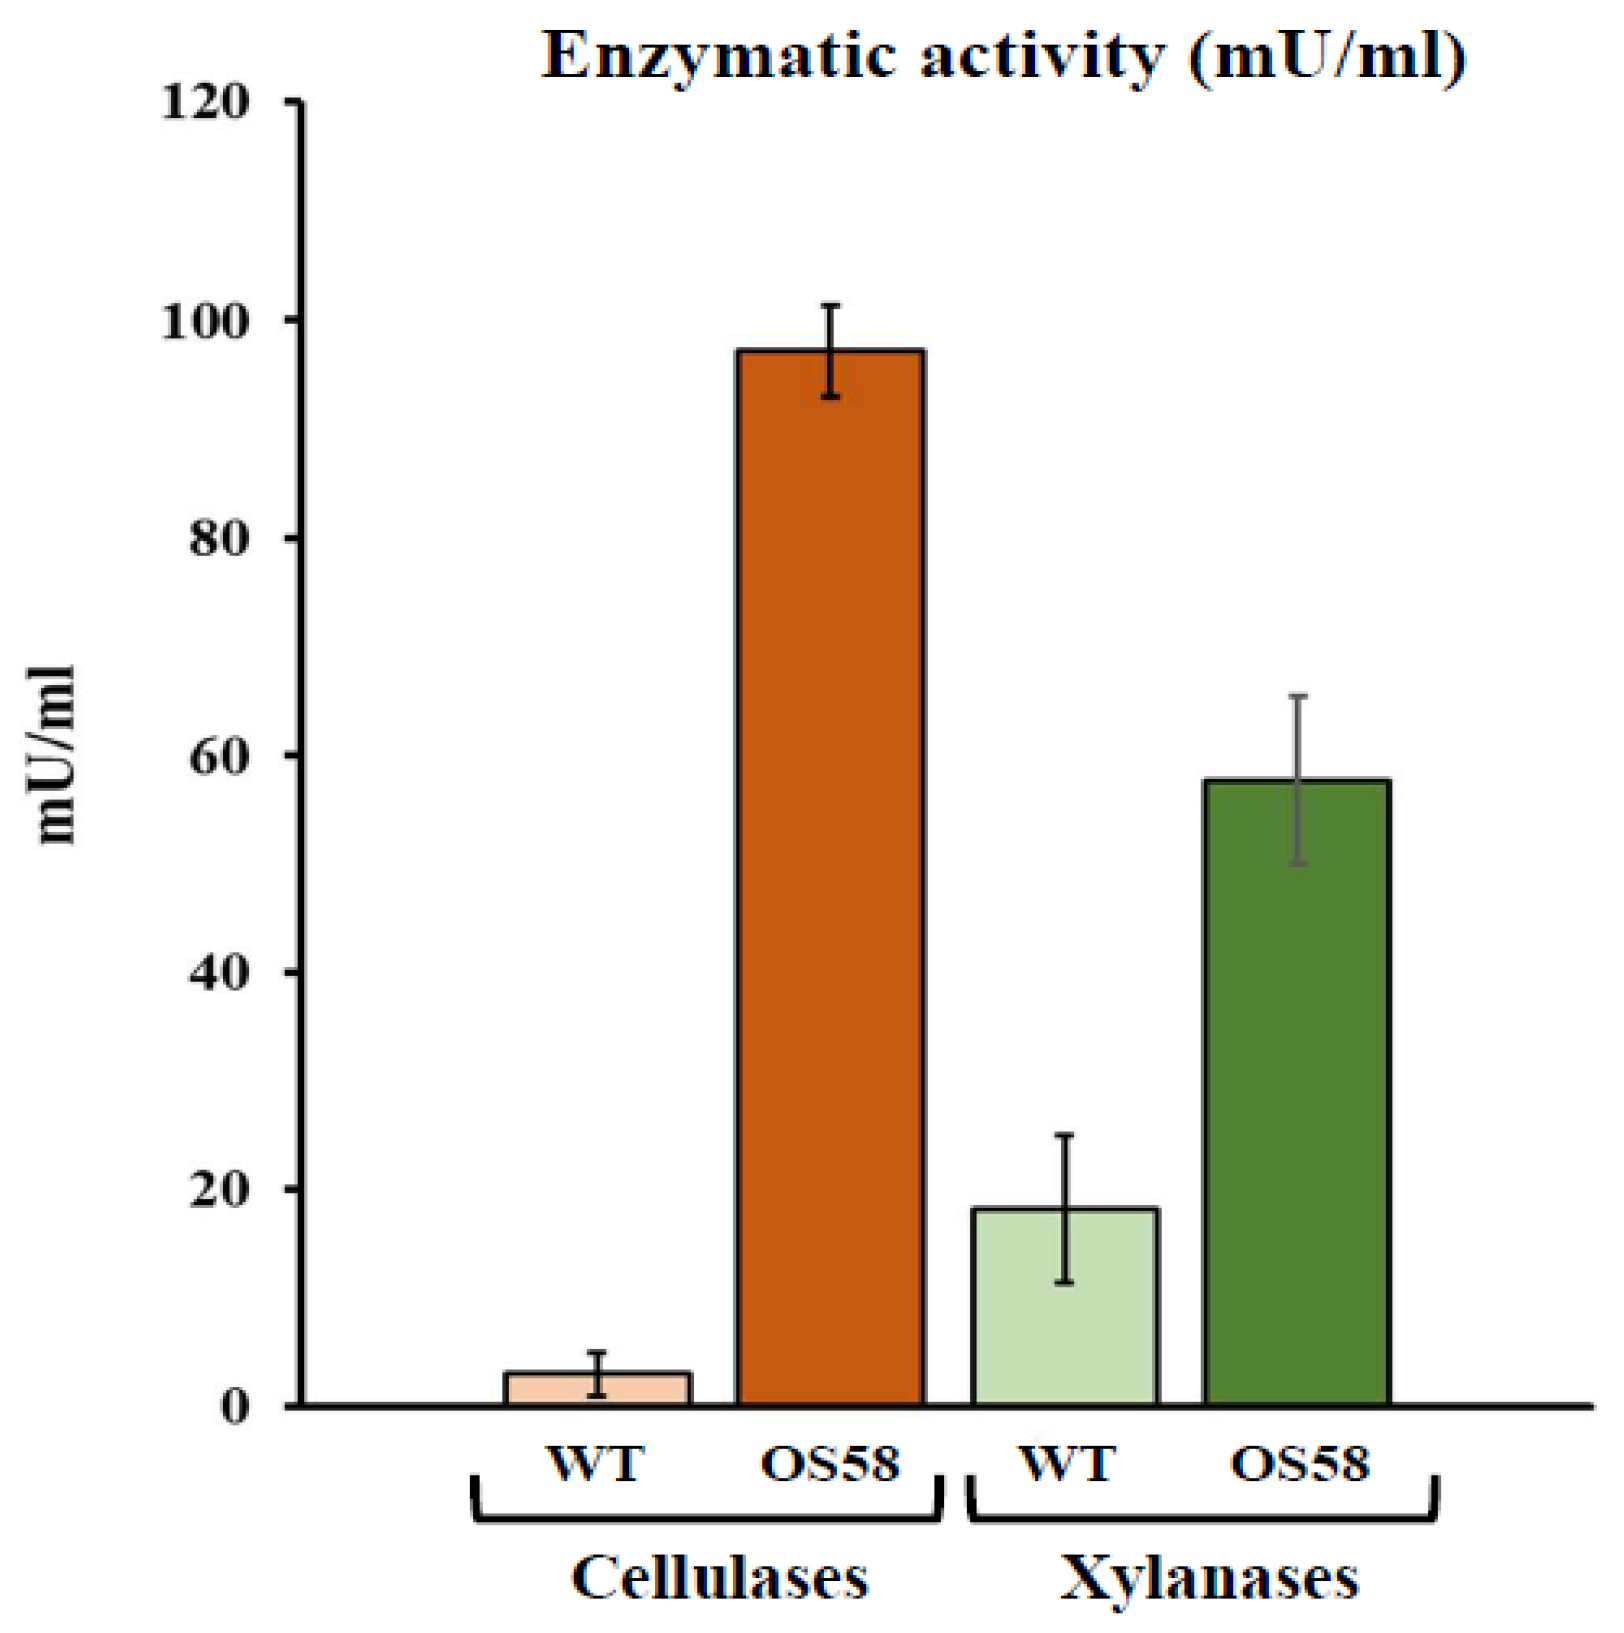 The enzymatic activity of cellulases (in orange) and xylanases (in green) in the WT and OS58 strains (as indicated on the x-axis). Cells were grown in a chemically defined medium for 24 h and assayed with a commercial kit. Enzymatic activity (in mU/mL of spent medium) is reported on the y-axis. Values represent the average of at least five independent experiments. Error bars represent the standard error of the mean (SEM).